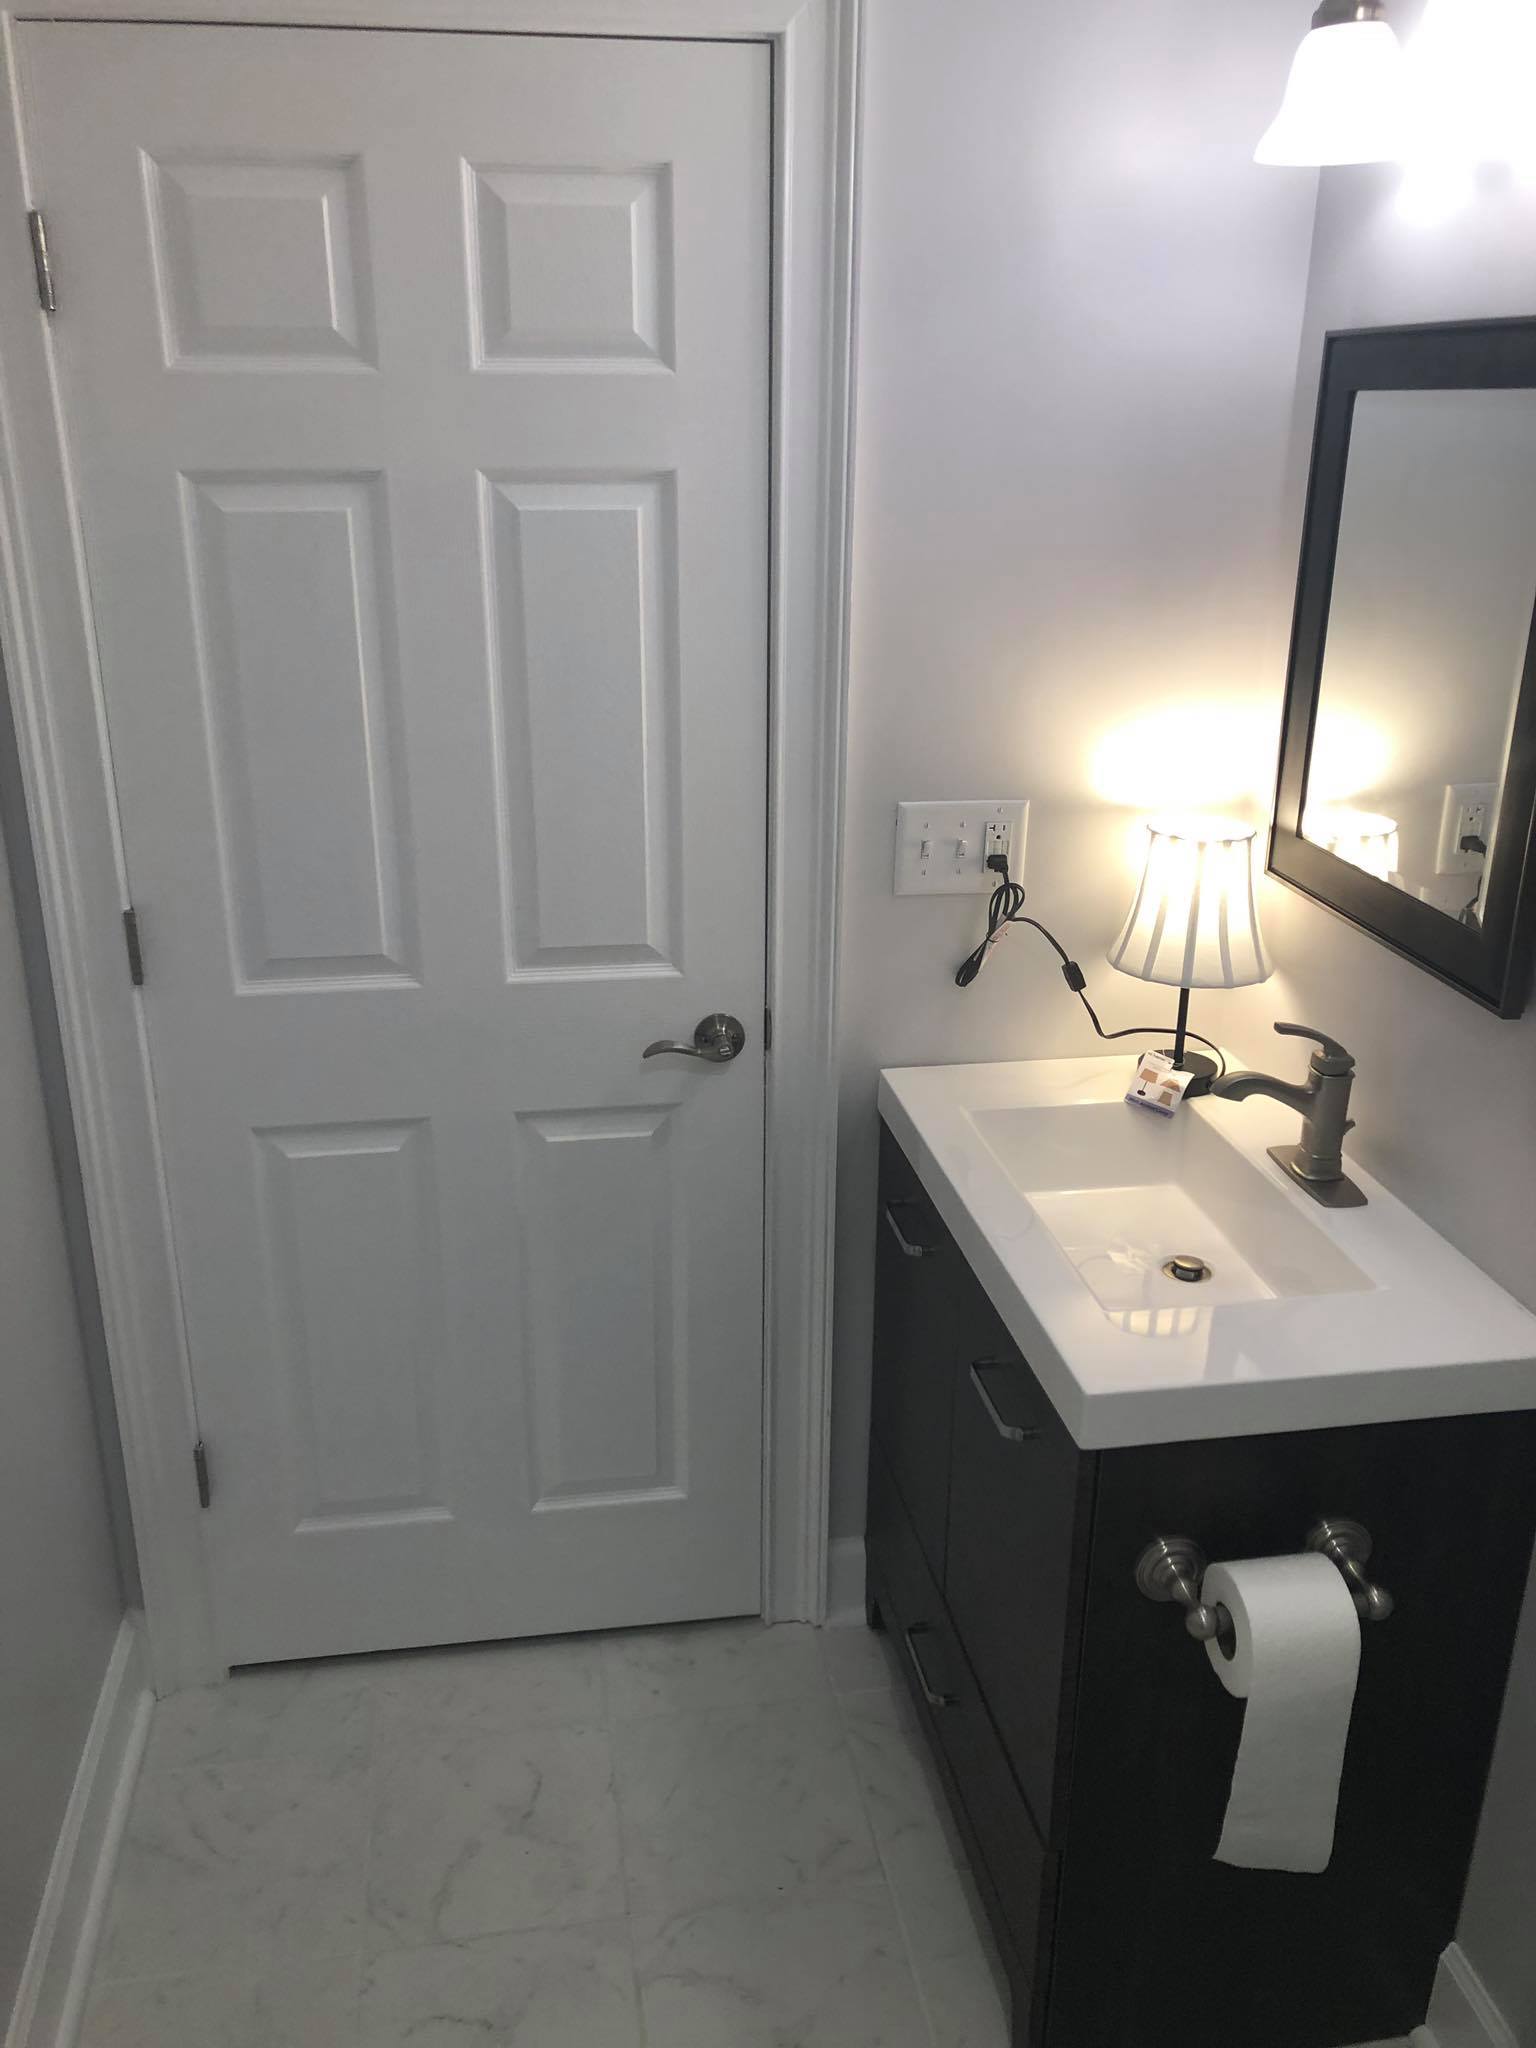 Completed Basement Bathroom Build and Installation with Vanity Tub and Shower 2